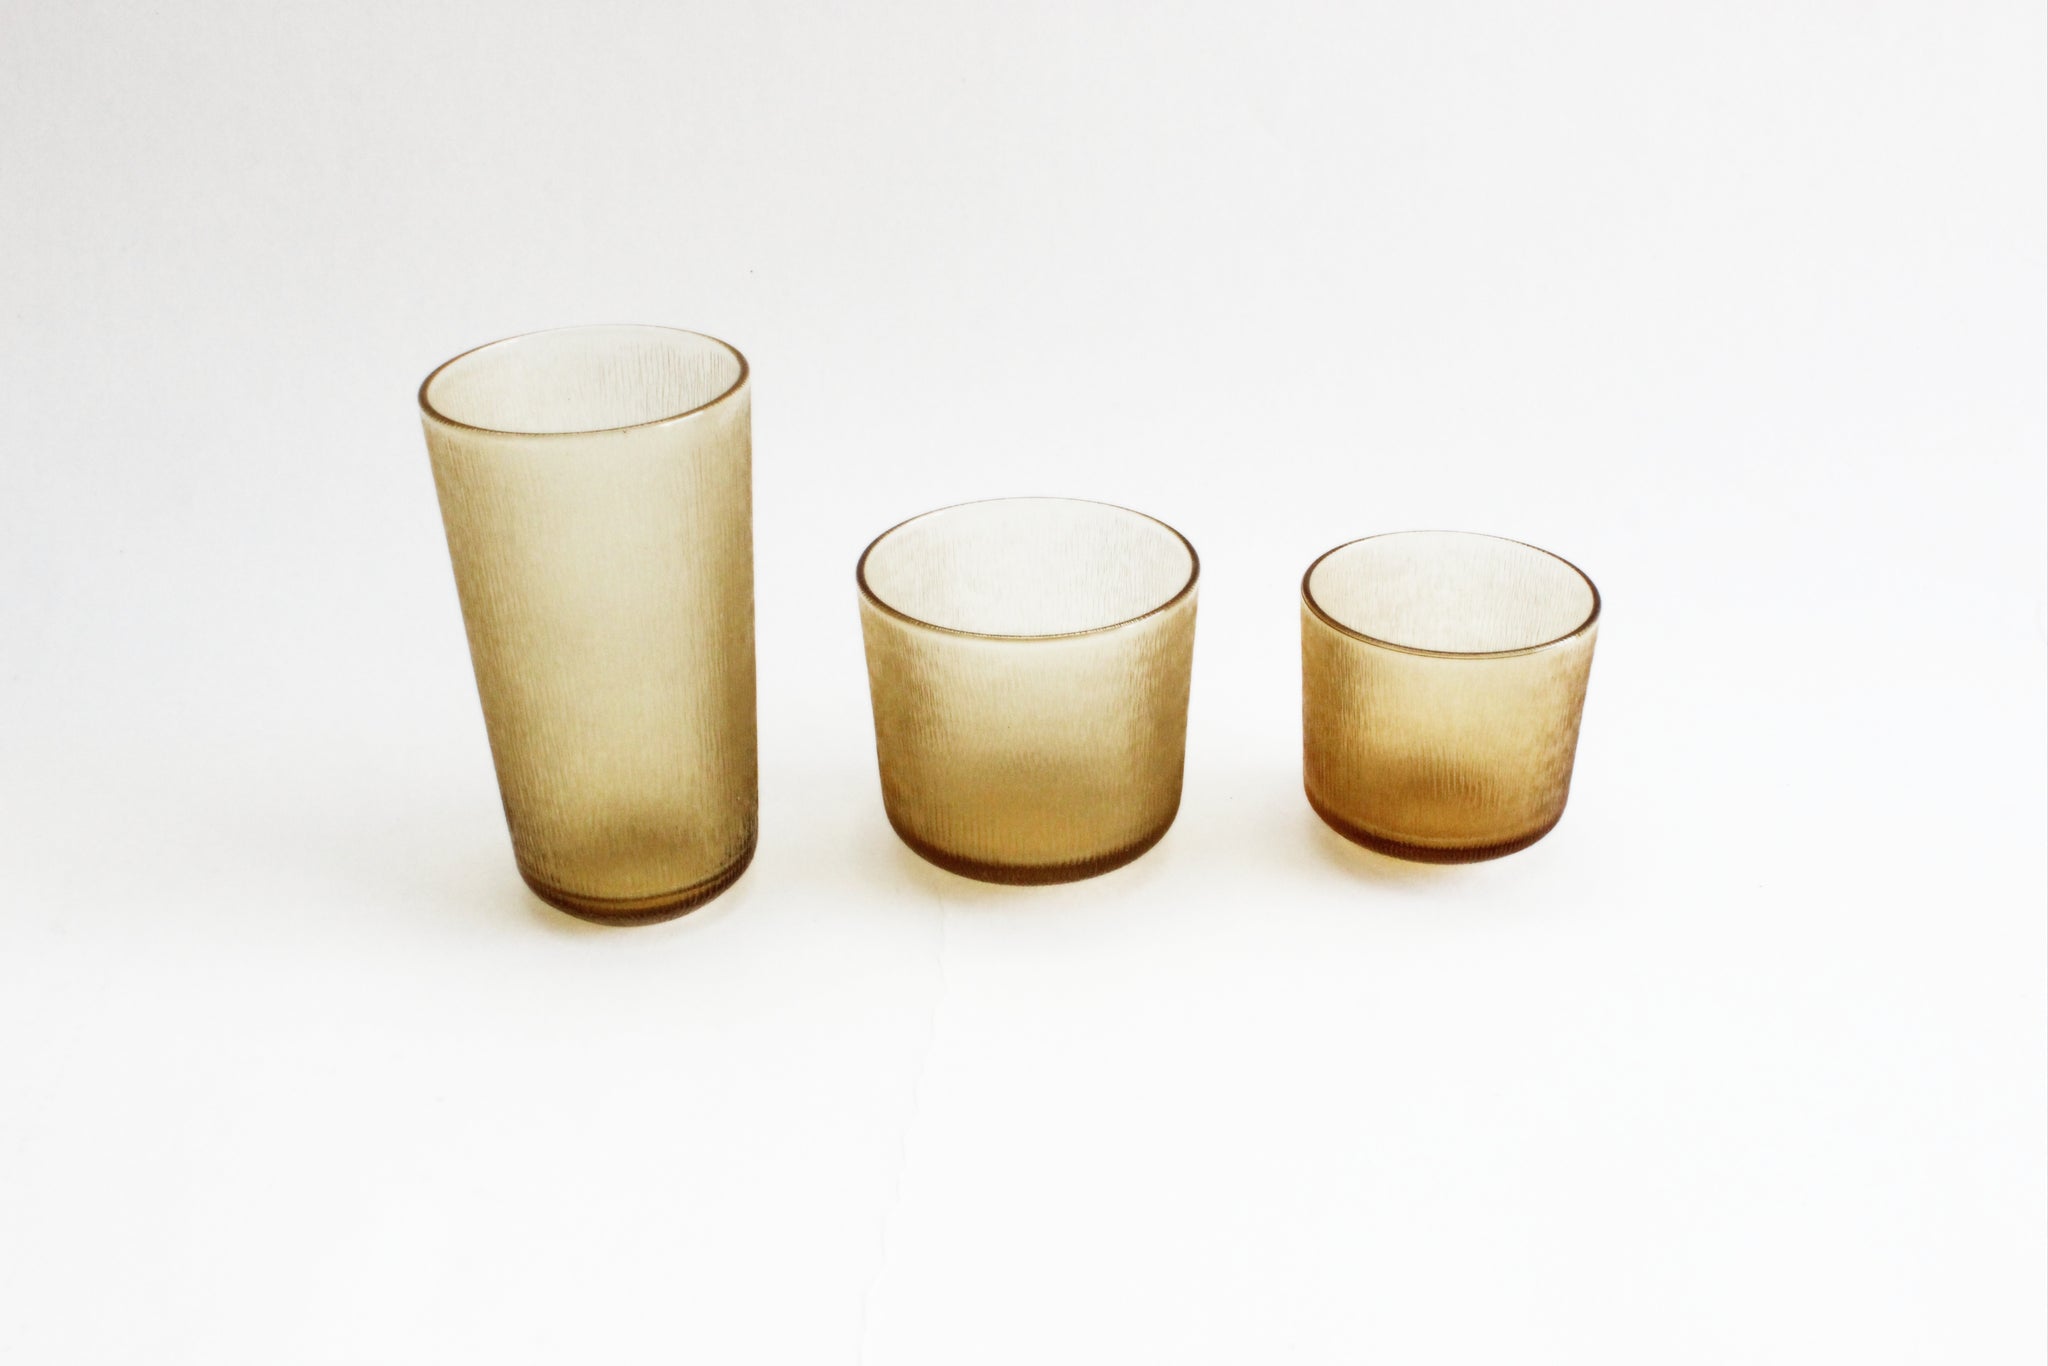 Drinking glasses & Tumblers - Shop at